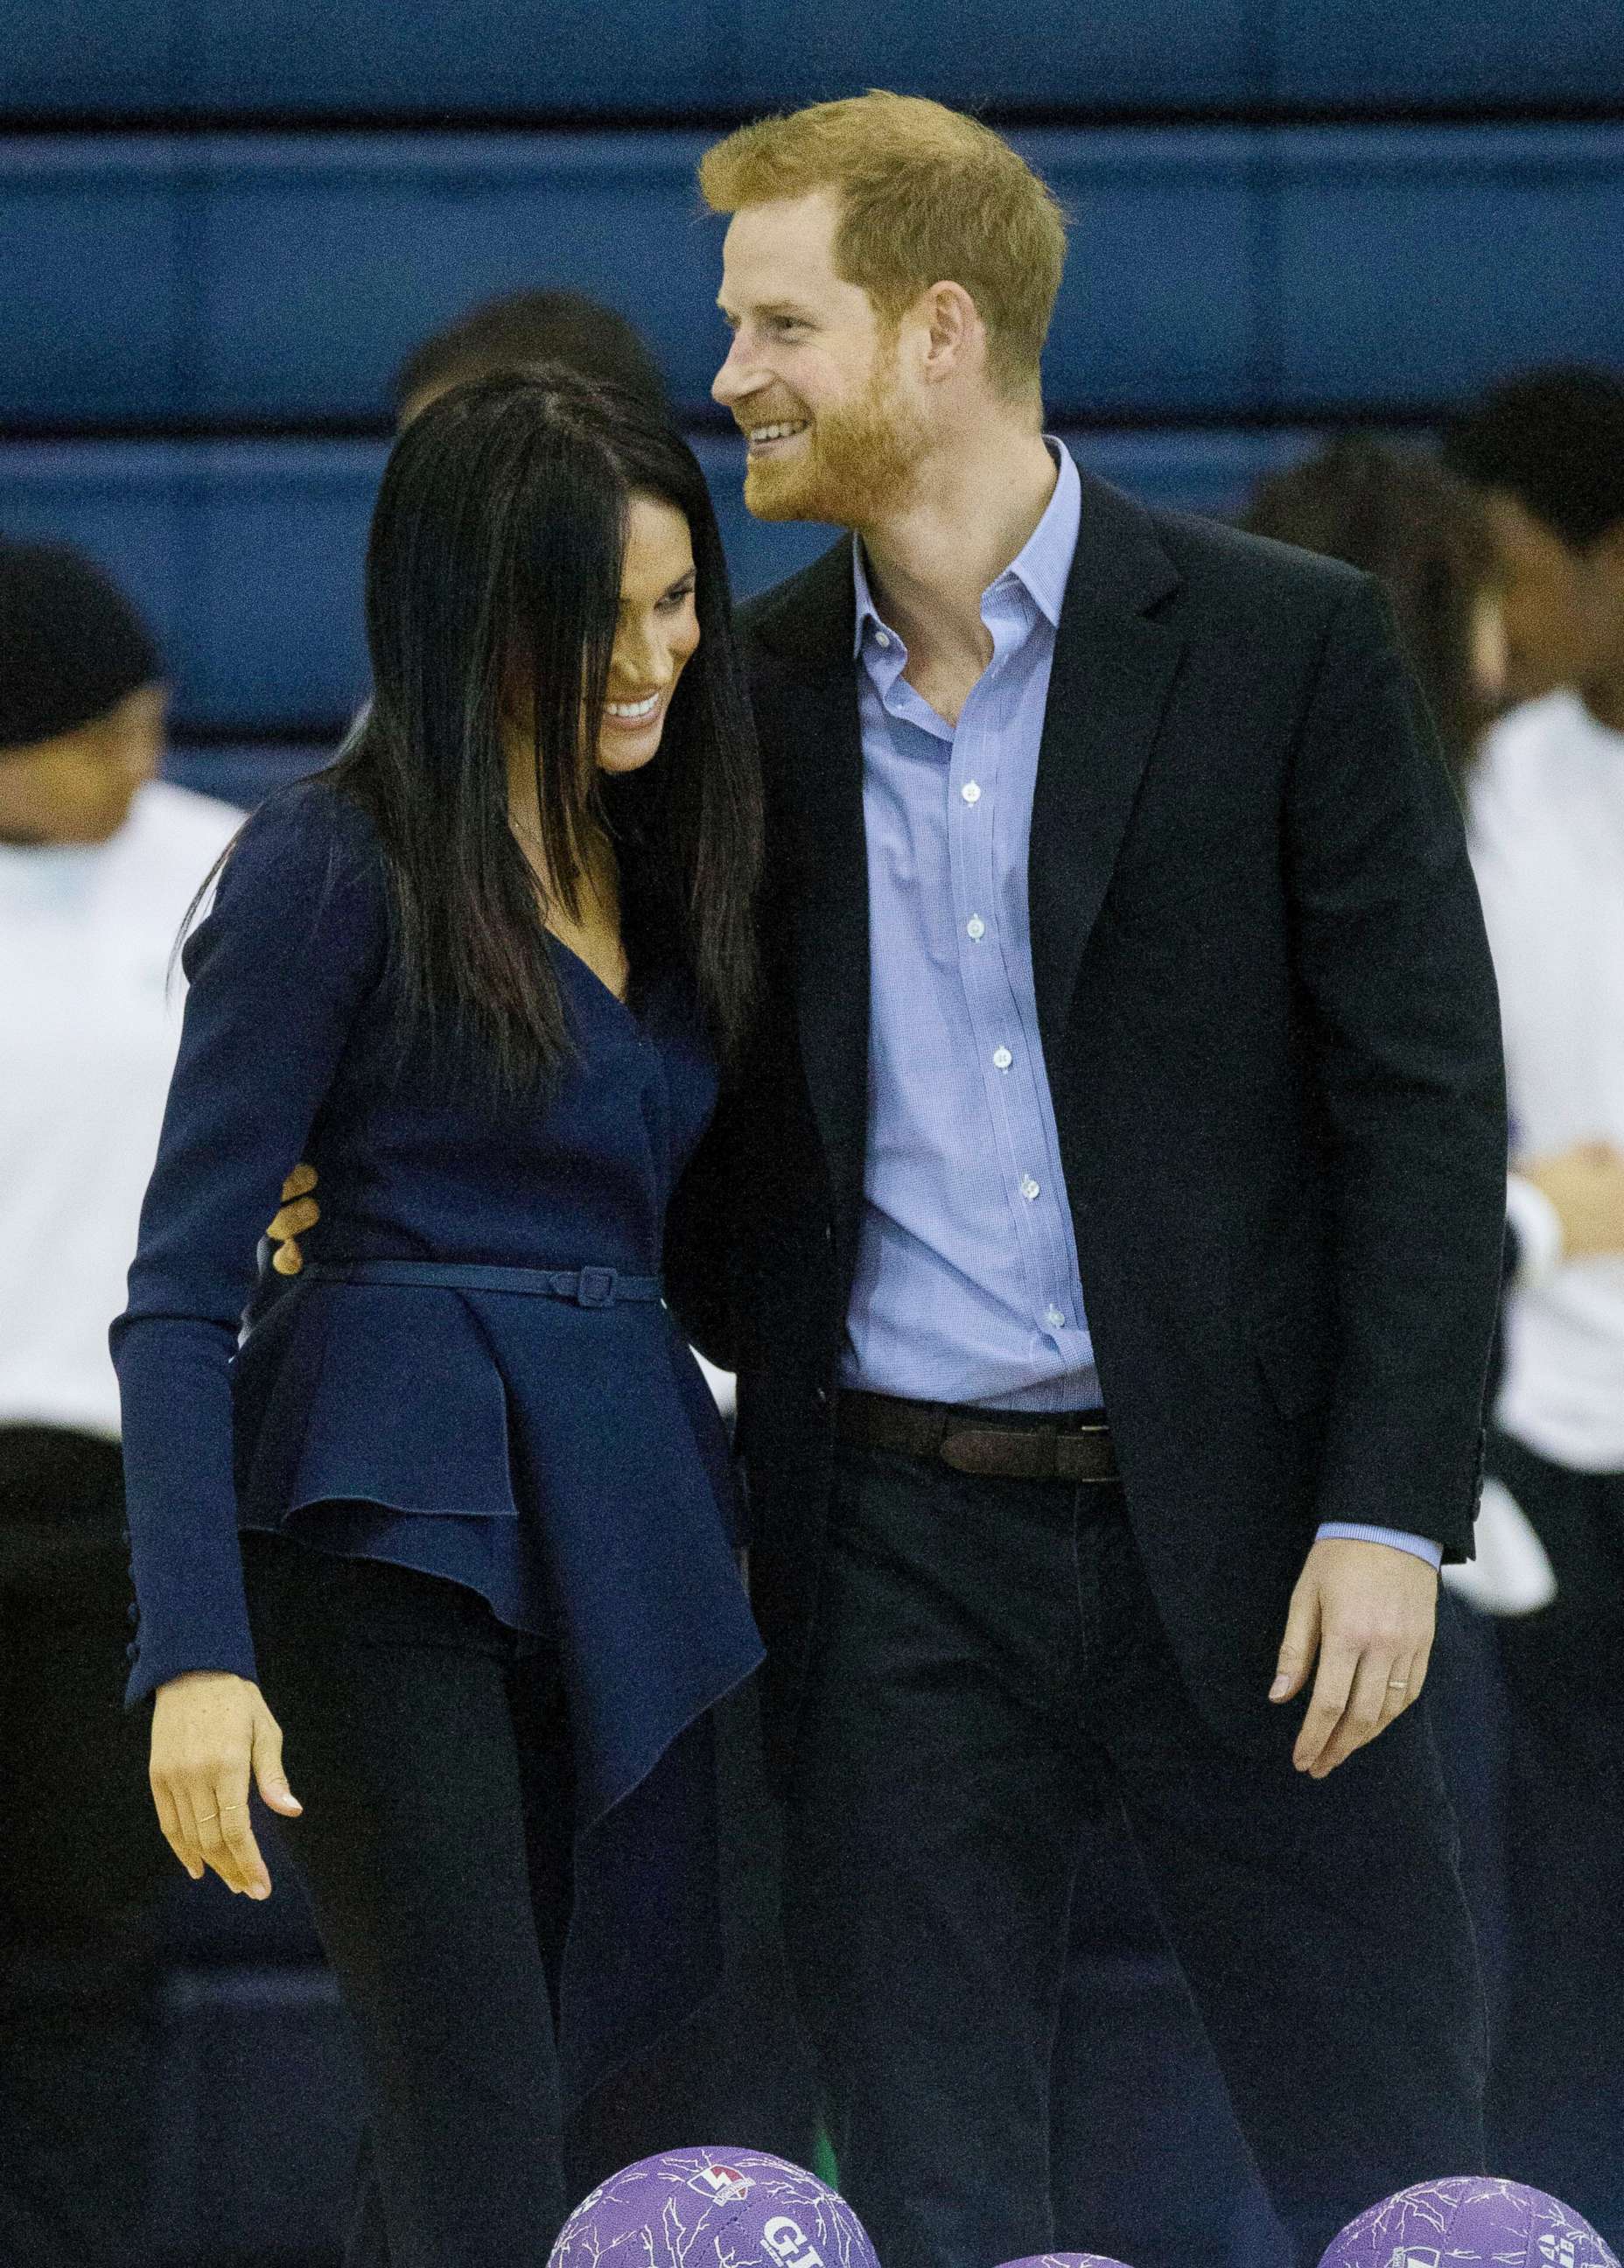 PHOTO: Meghan Markle, Duchess of Sussex joins Prince Harry during Coach Core apprentices at Loughborough University in Loughborough, Britain, Sept. 24, 2018.